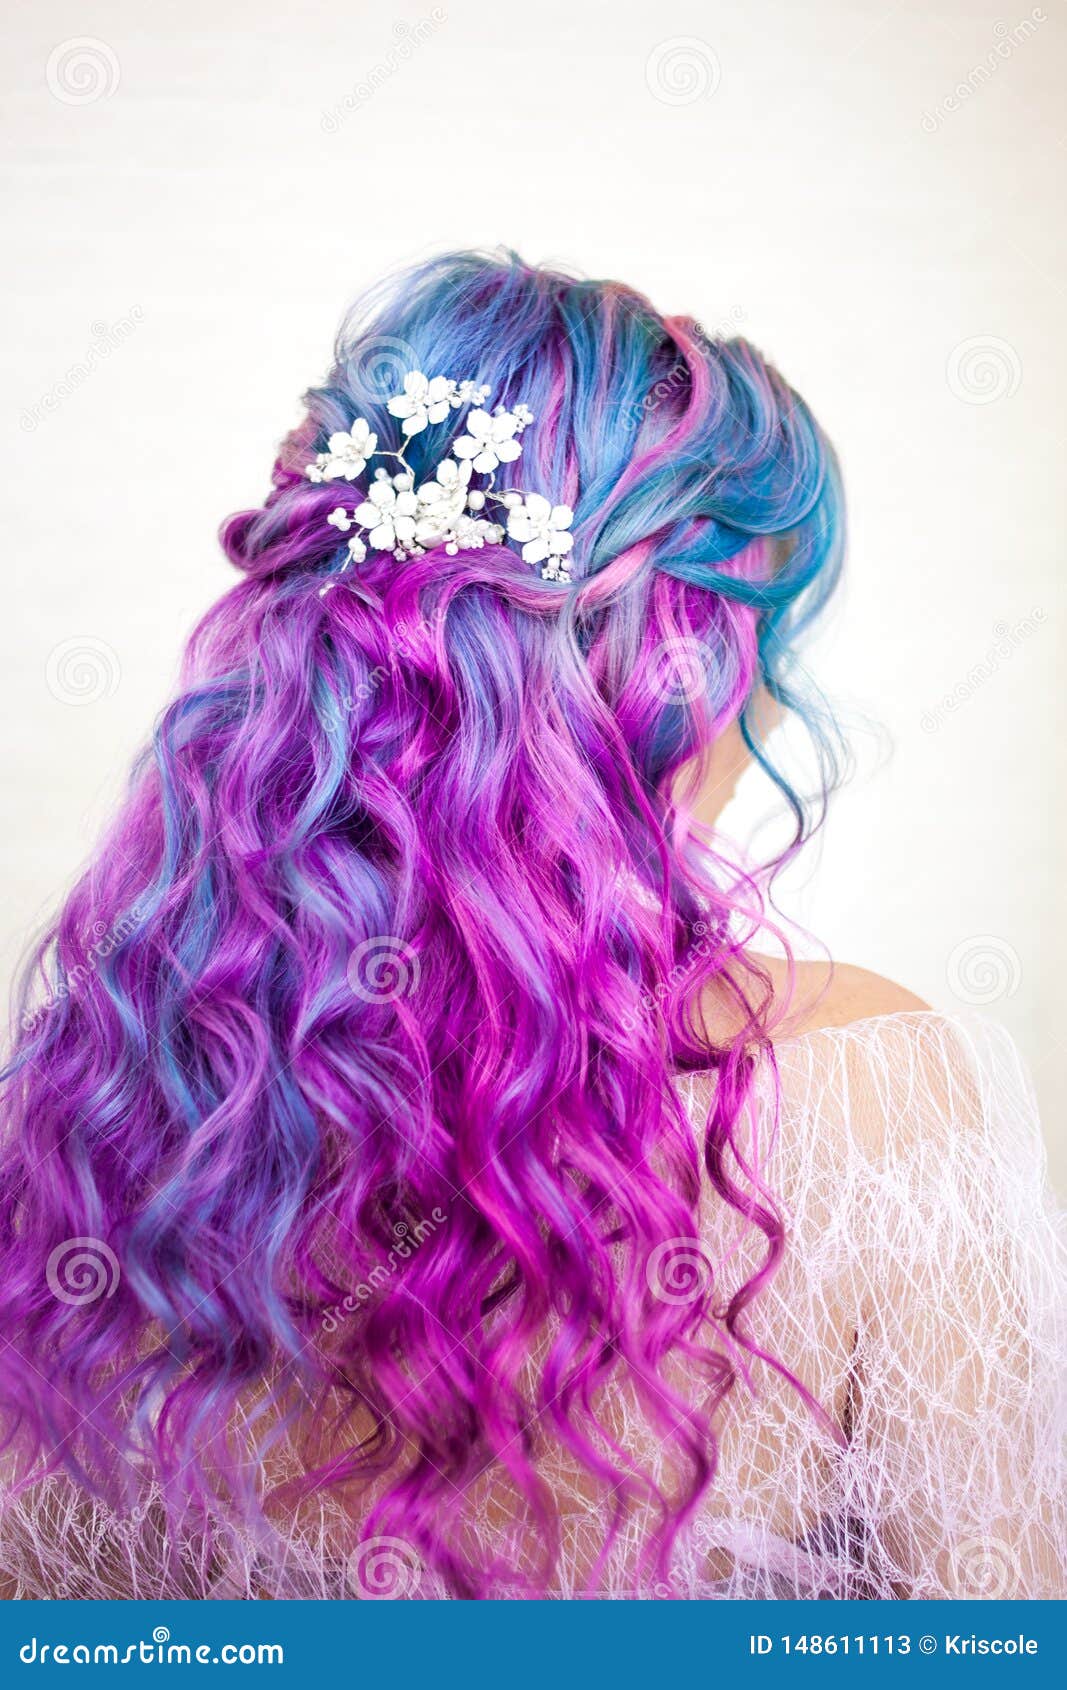 Beautiful and Healthy Hair with Bright Coloring. Long Curly Hair Purple and  Pink Tones Stock Image - Image of colors, female: 148611113